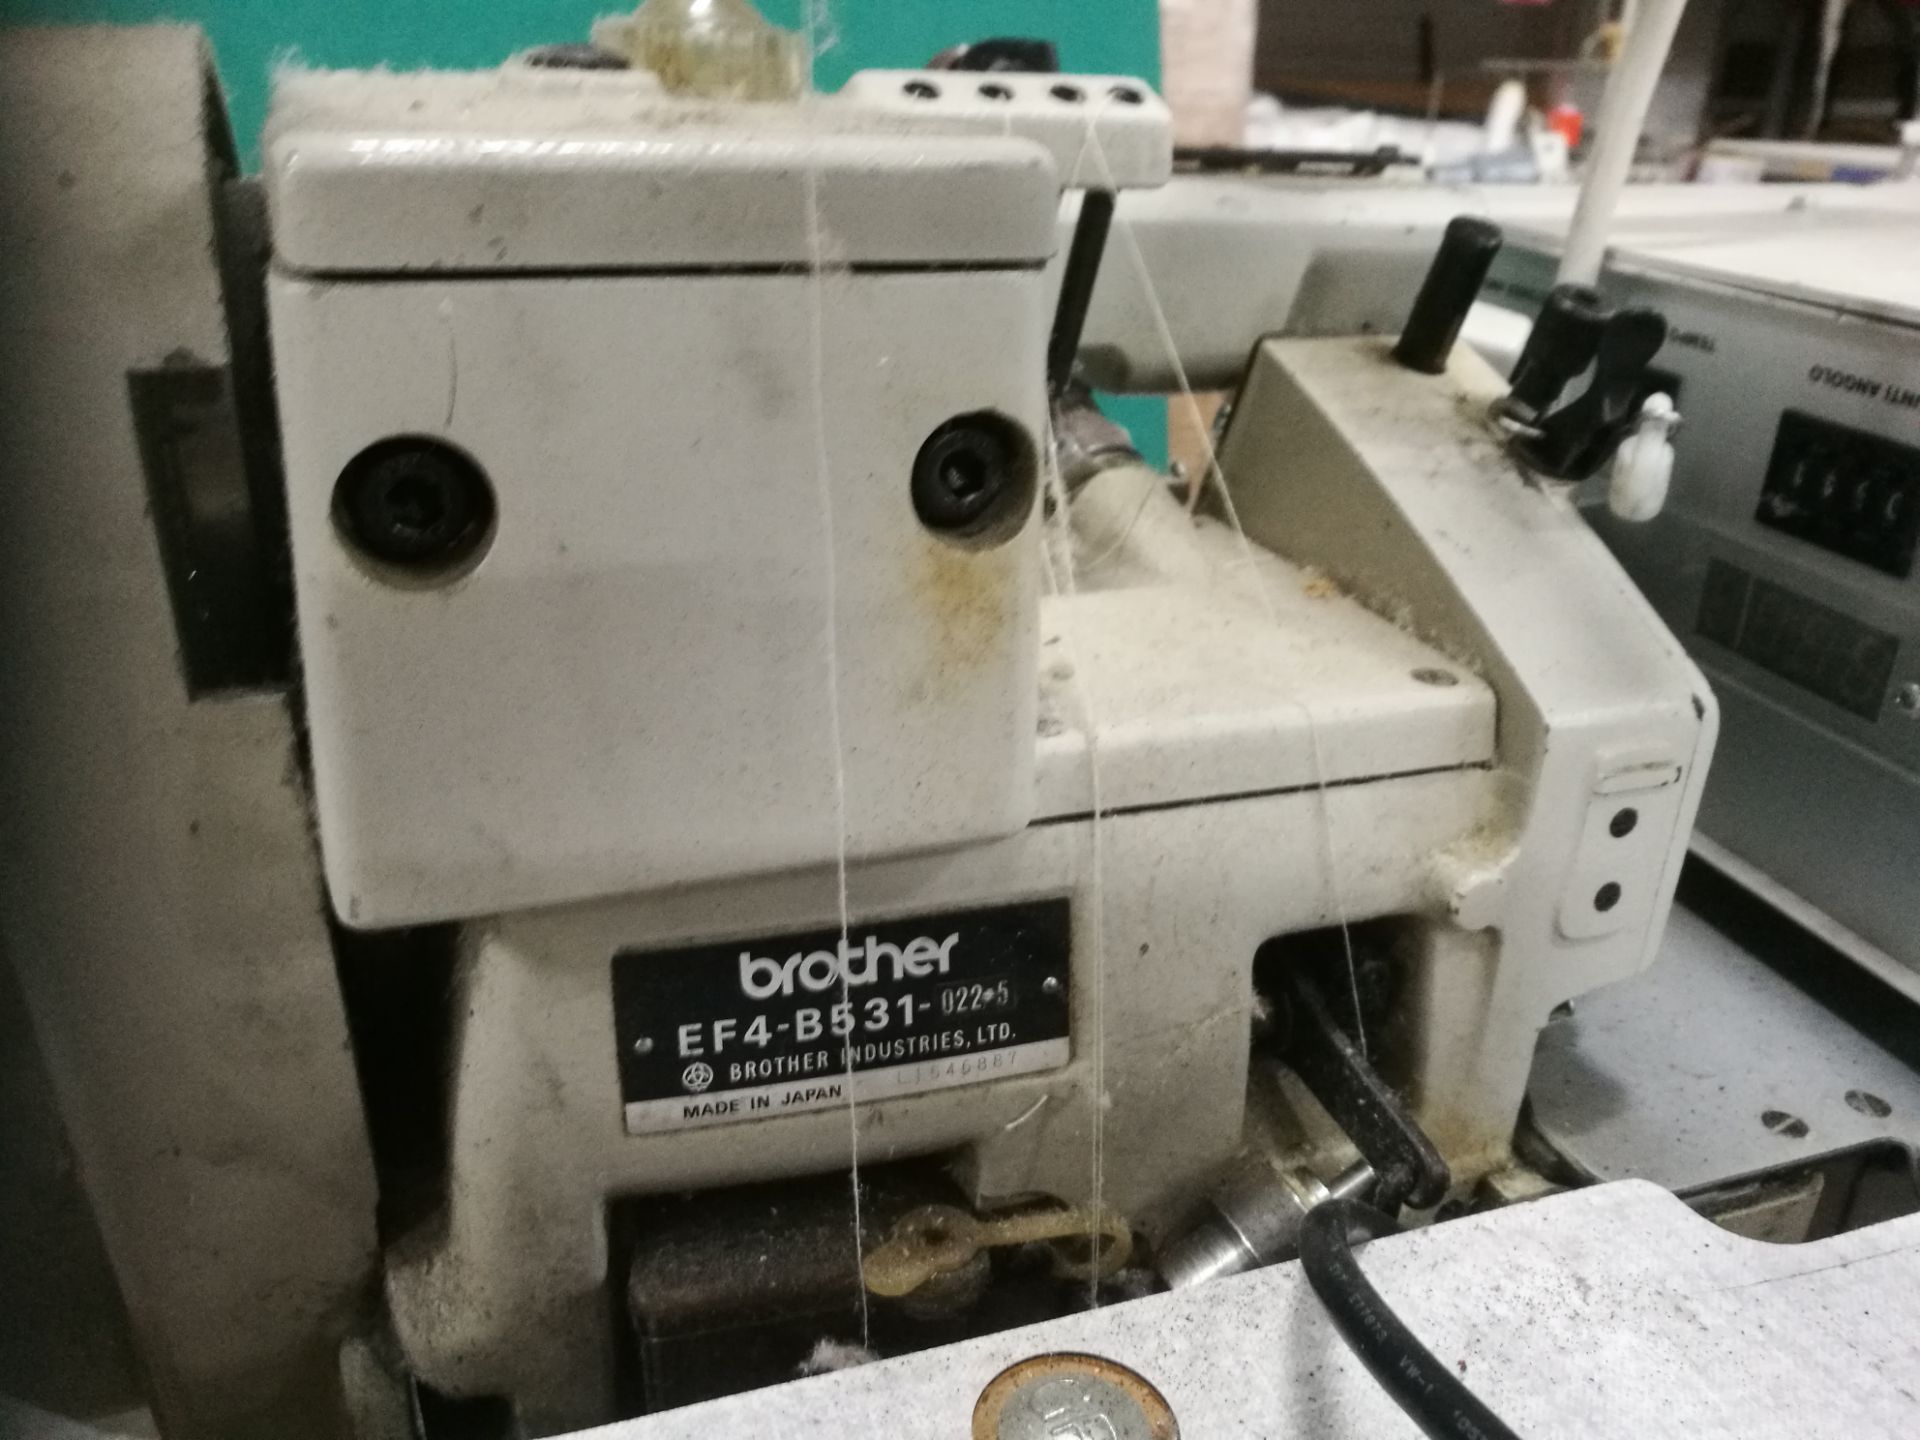 Brother 4 Thread Overlock Ef4-b531-022-5 Industrial Sewing Machine - Image 3 of 6